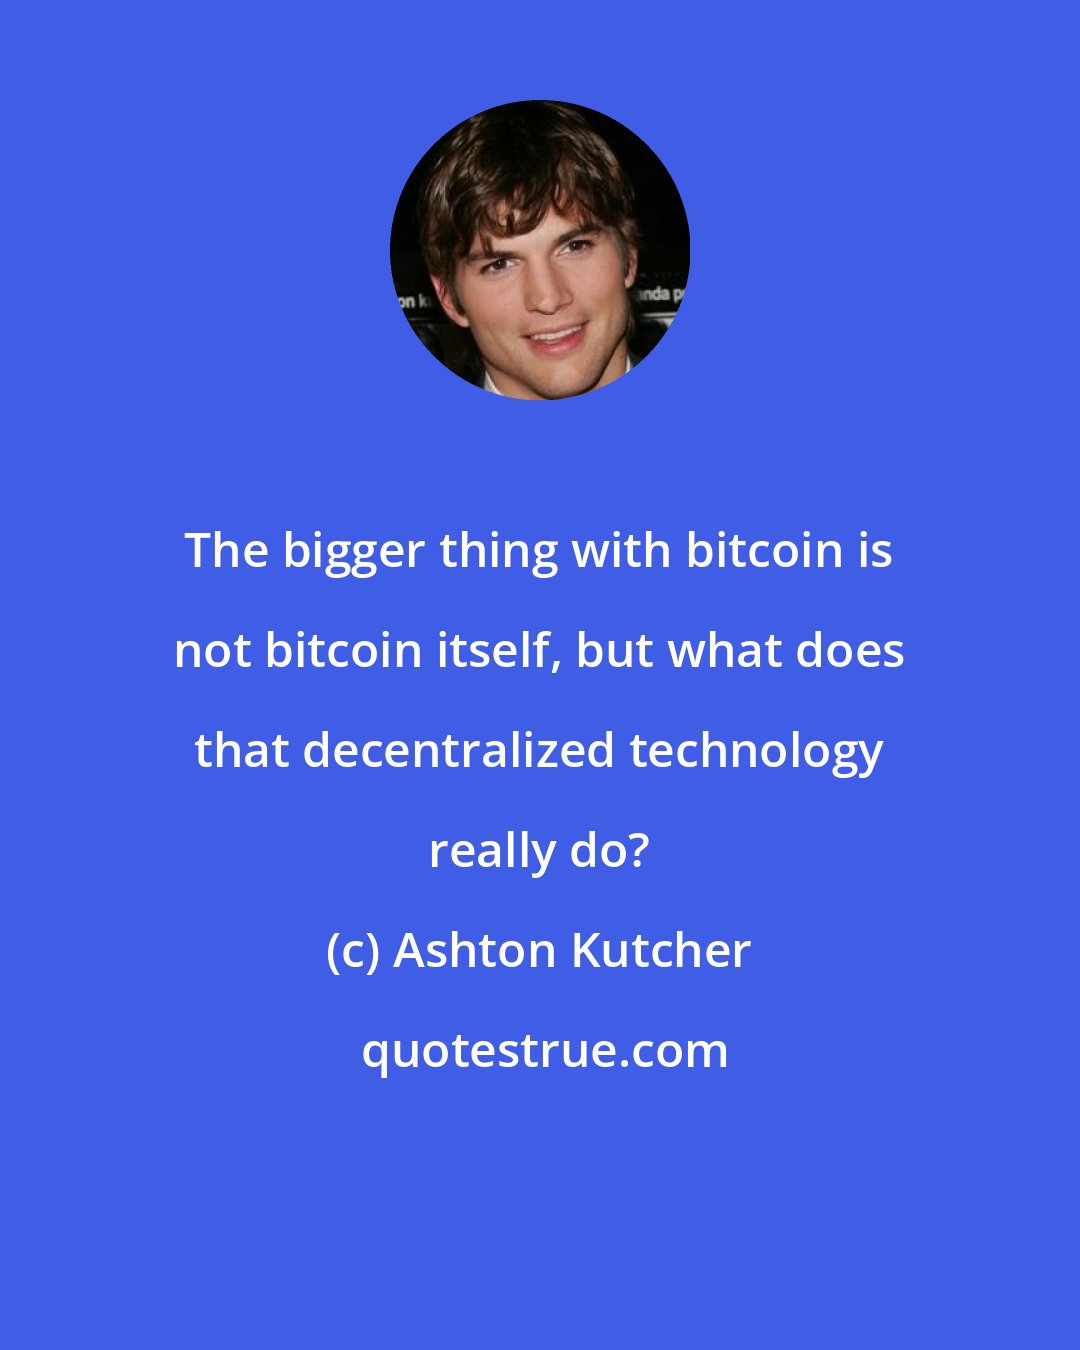 Ashton Kutcher: The bigger thing with bitcoin is not bitcoin itself, but what does that decentralized technology really do?